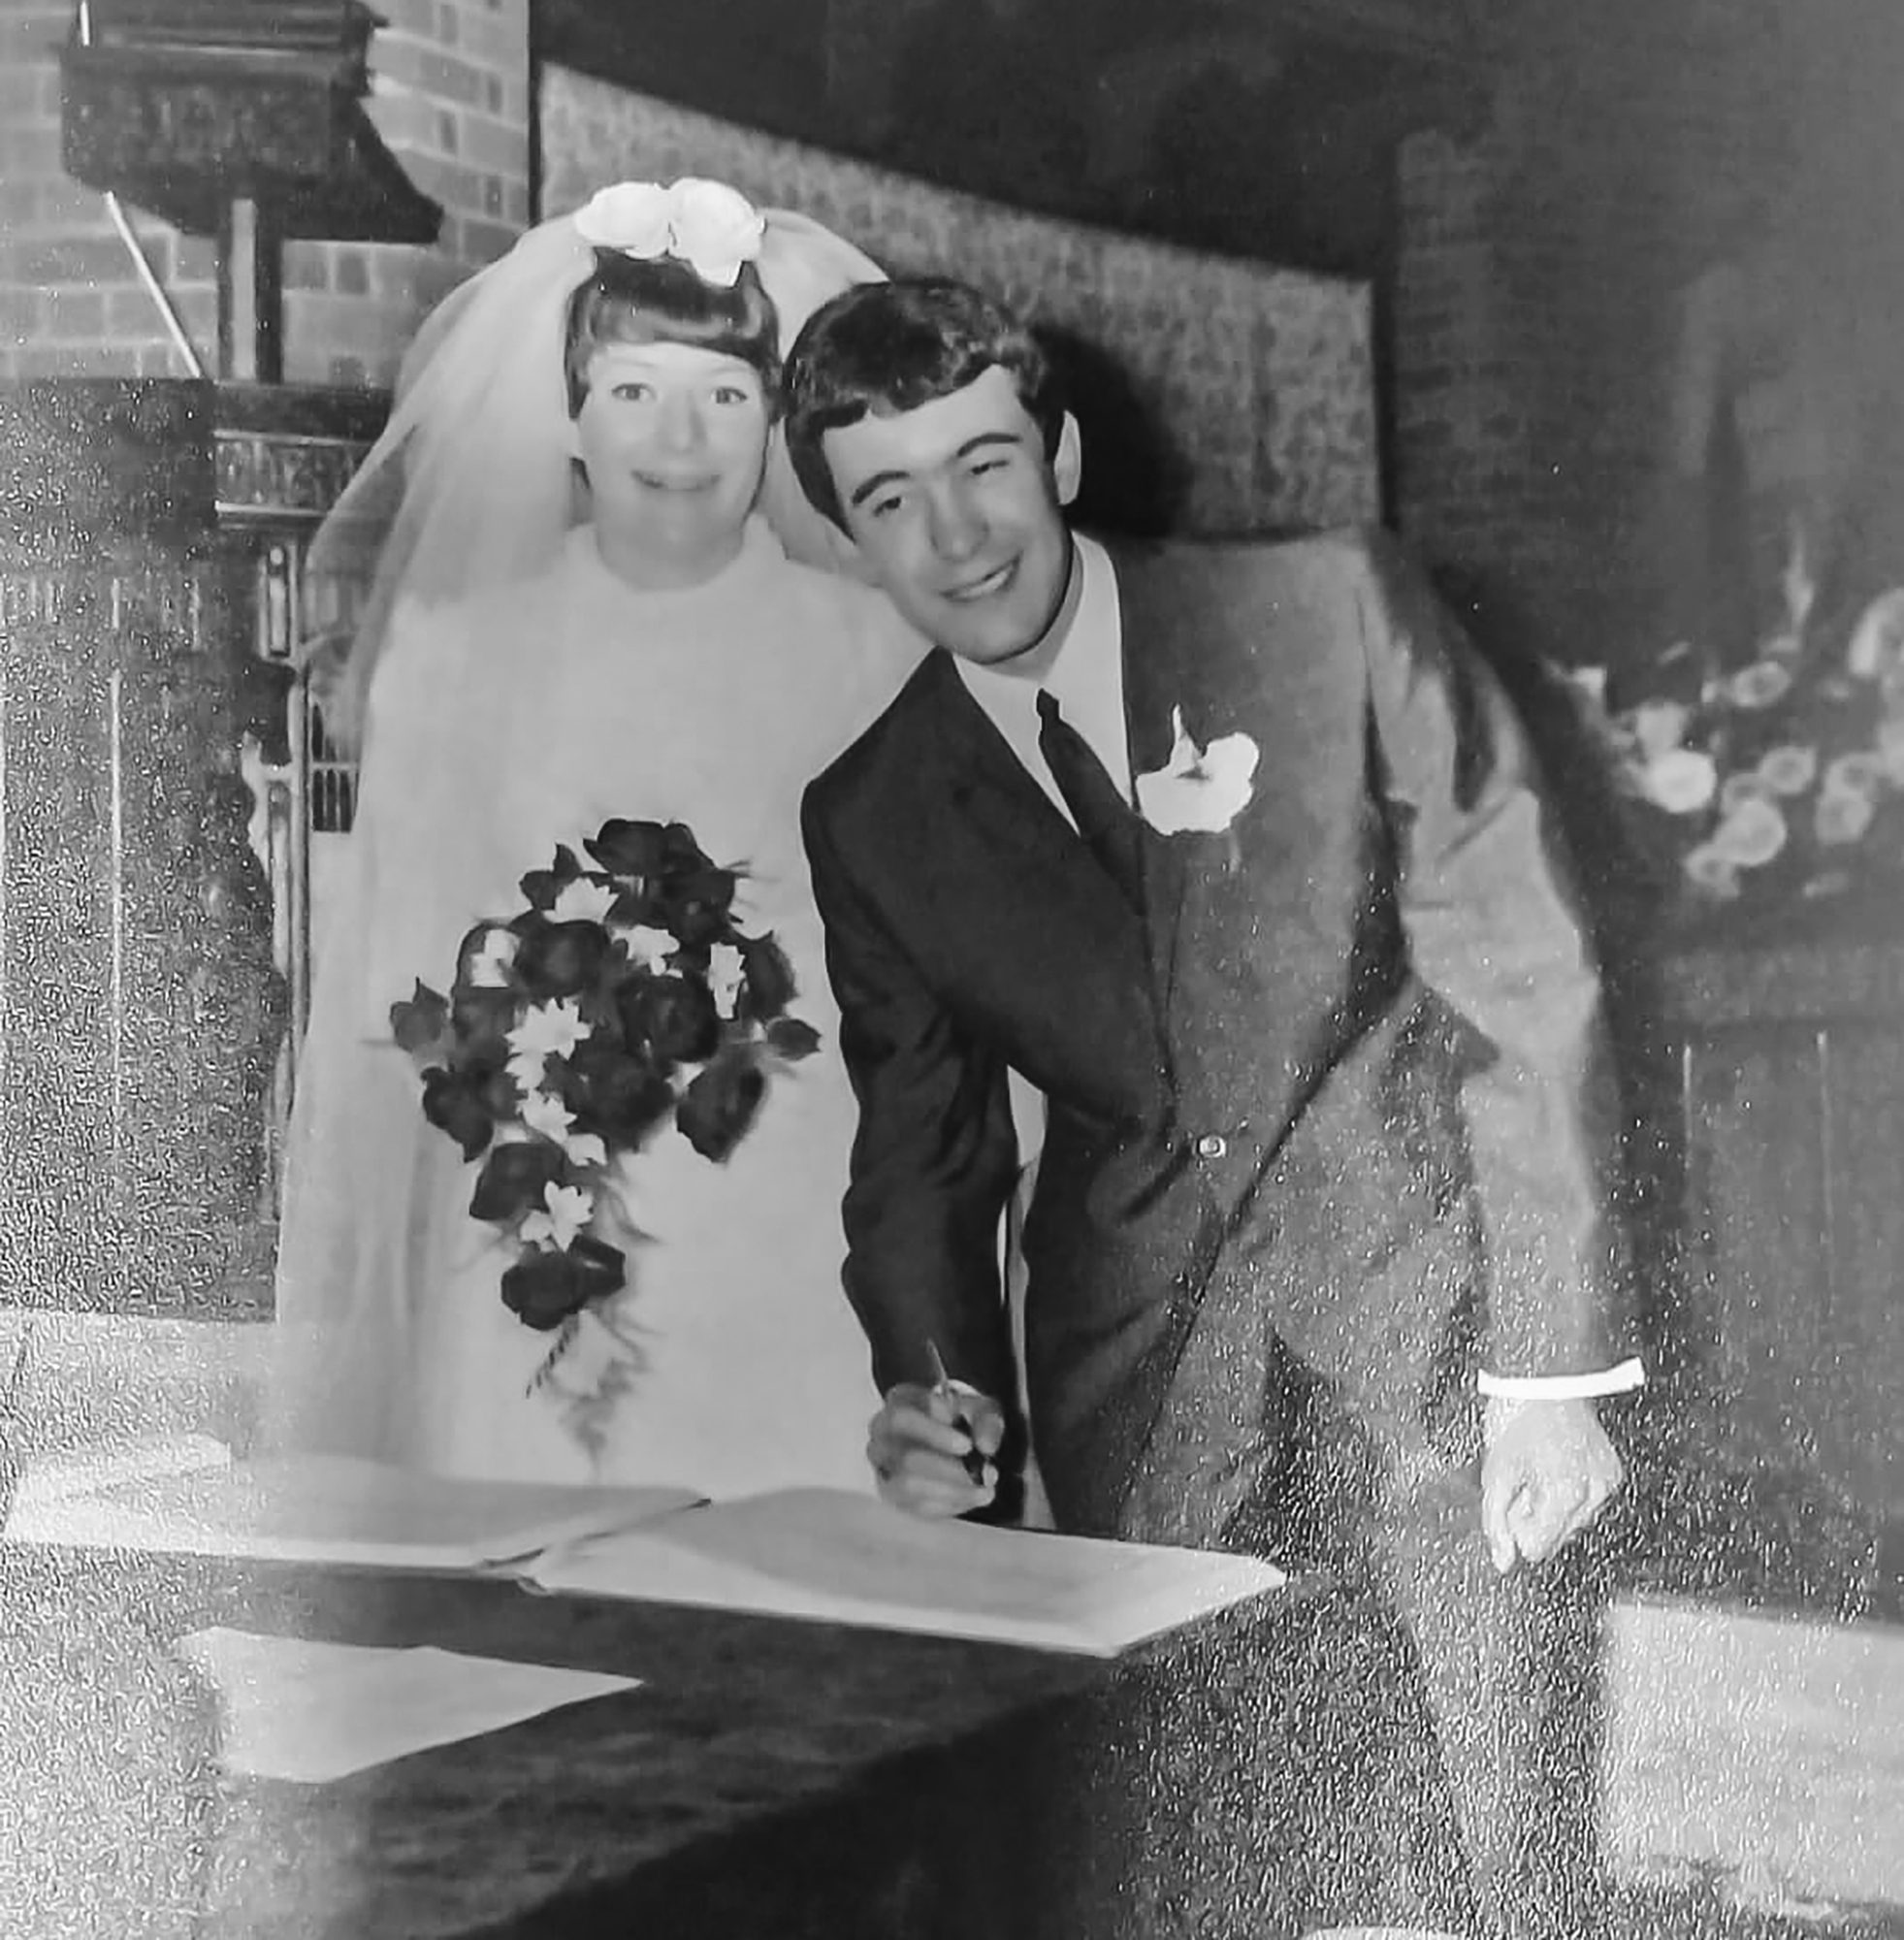 An old photo of Irene with her husband on their wedding day.